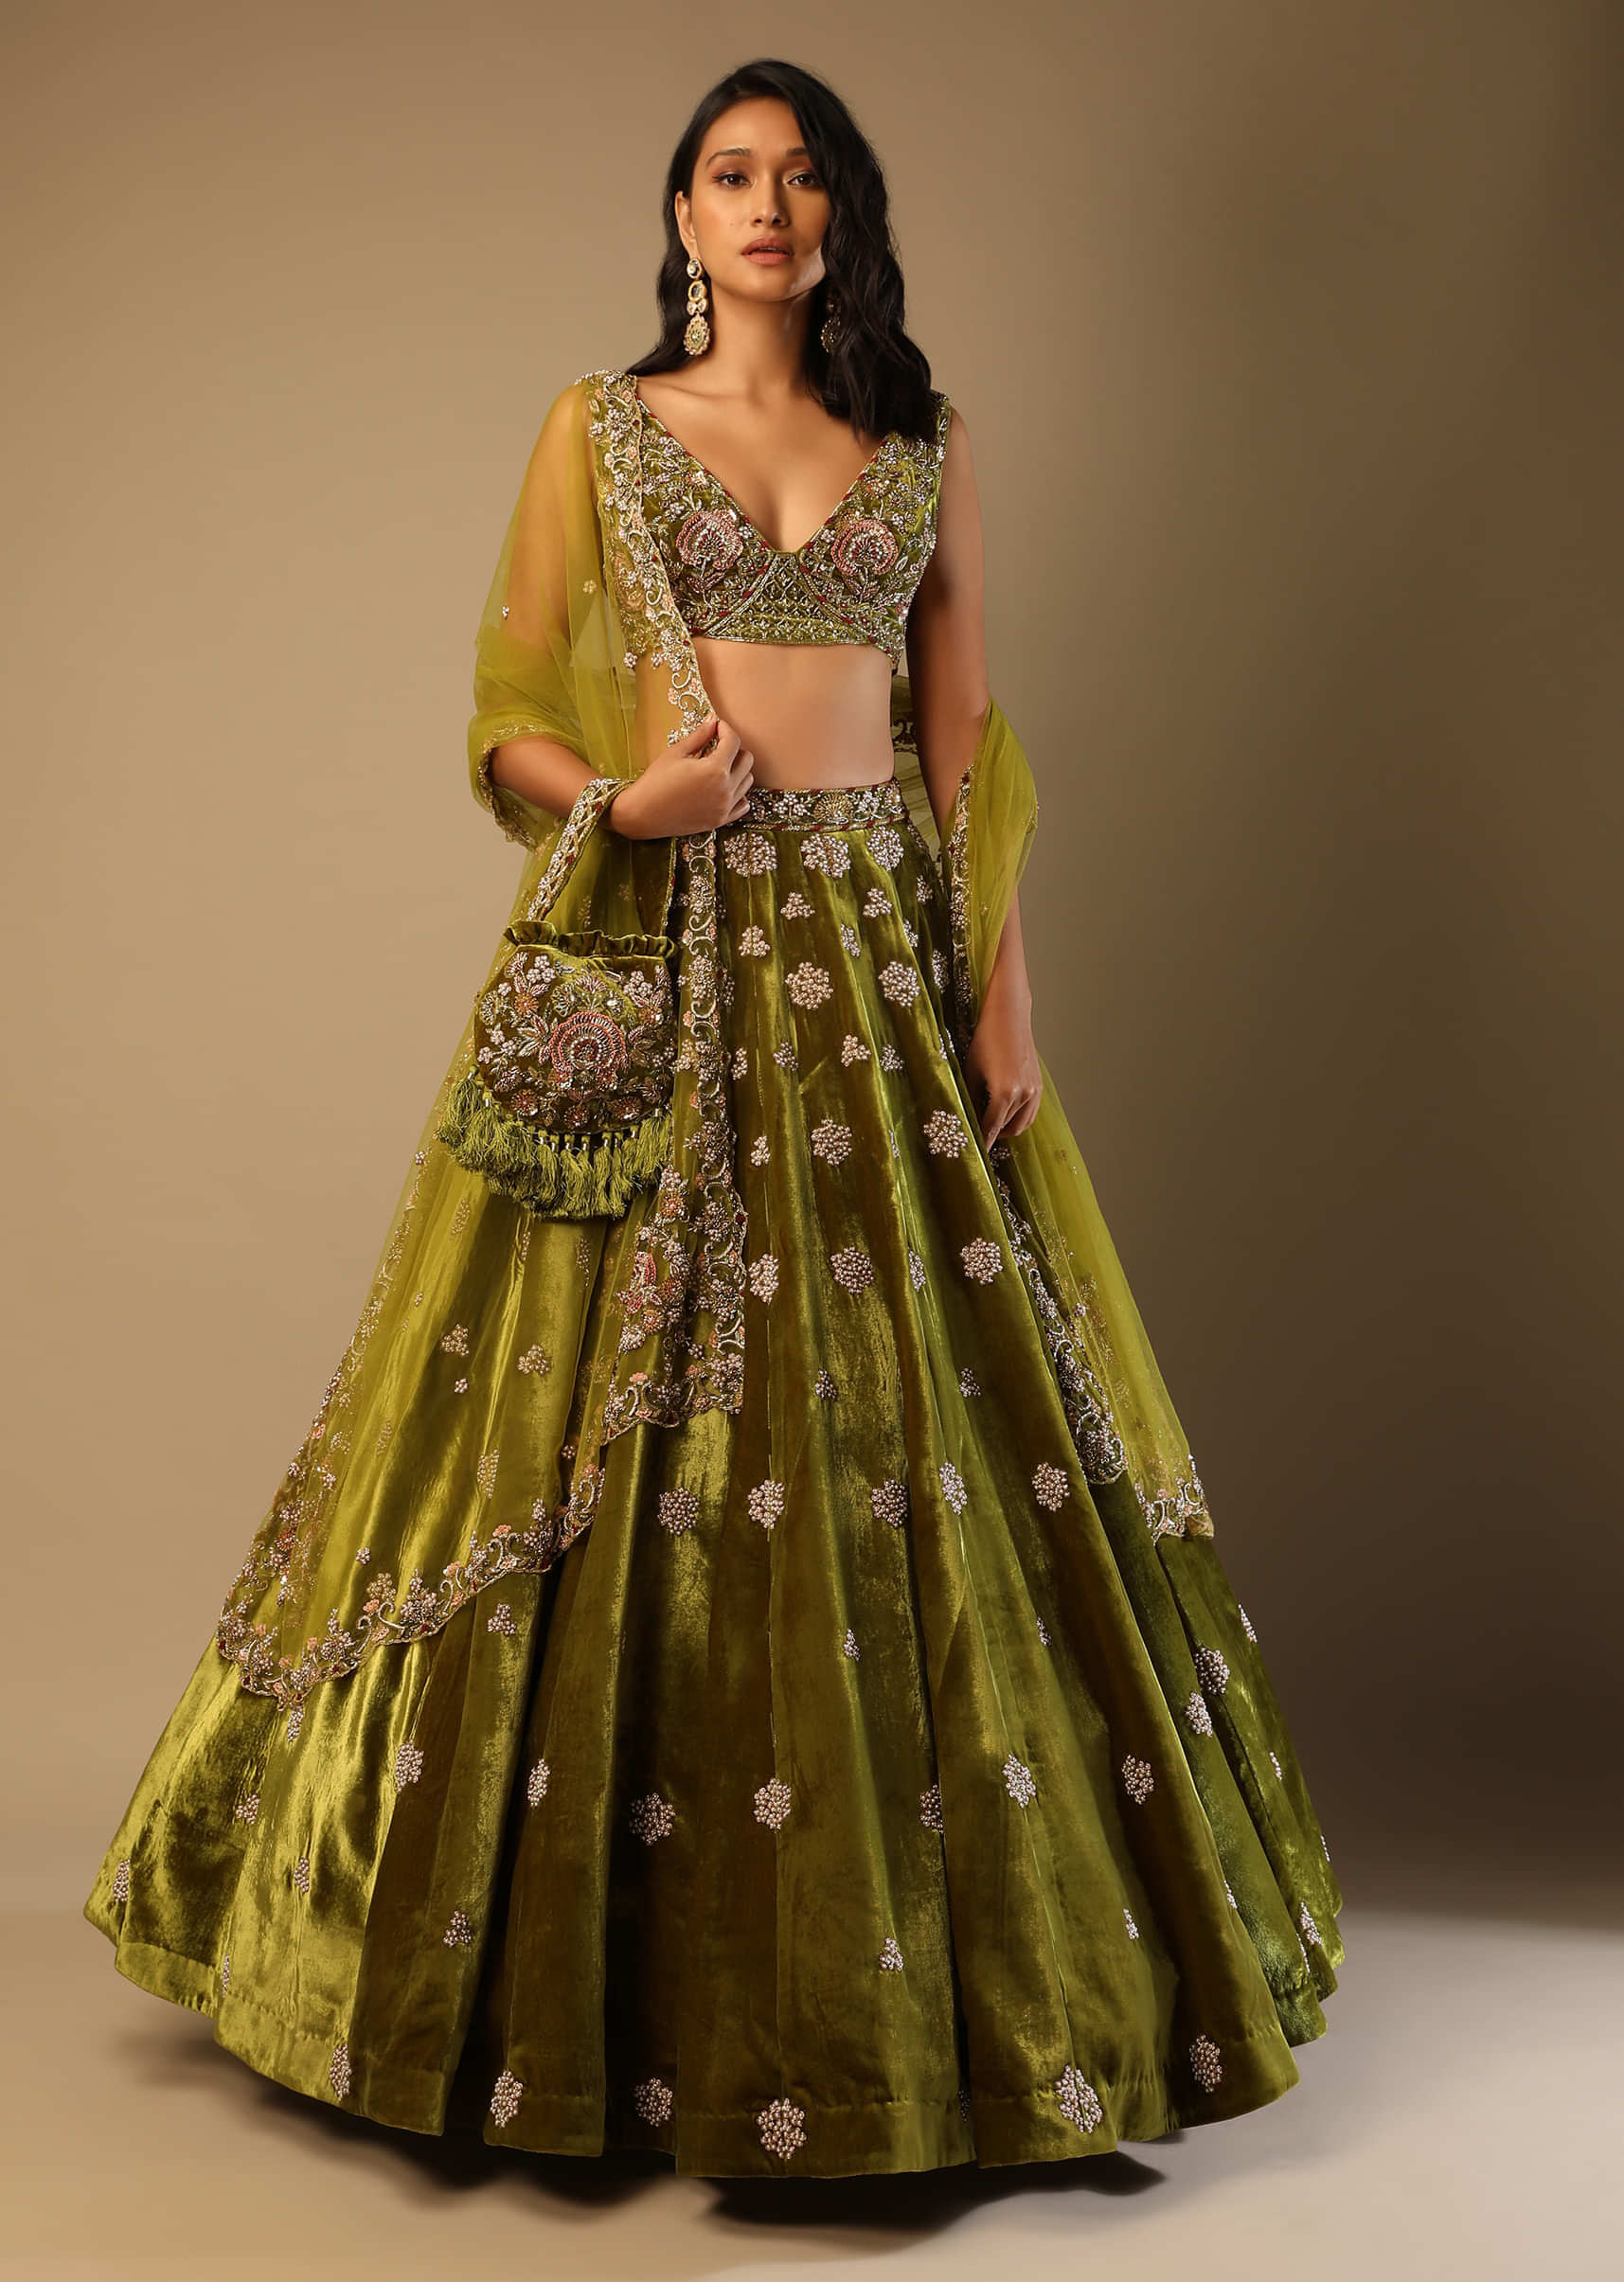 Moss Green Lehenga Choli With Multi Colored Hand Embroidered Floral Buttis 